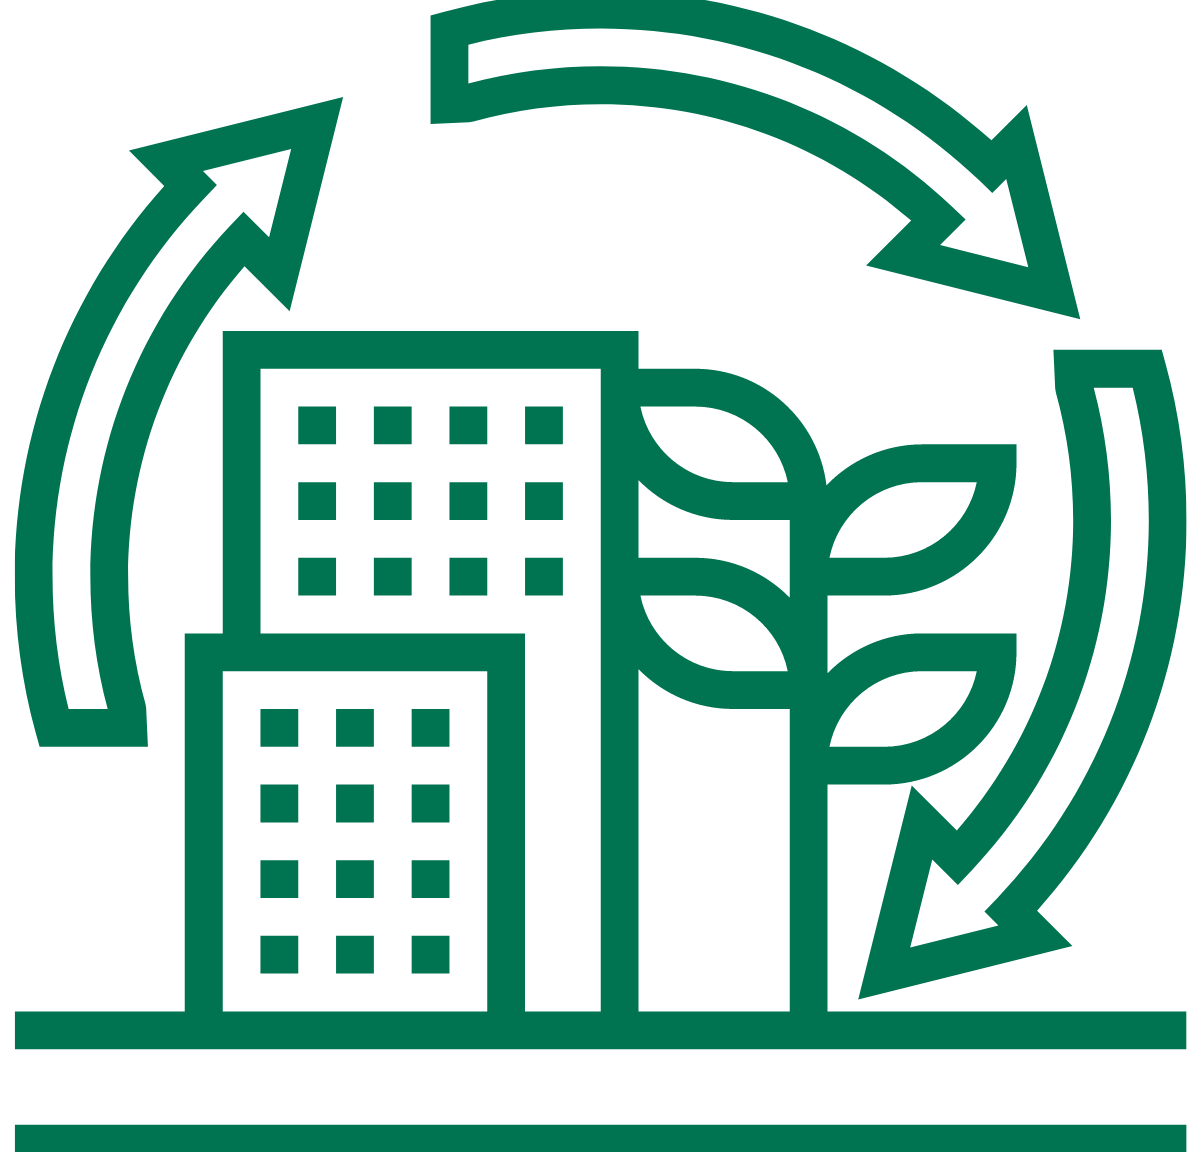 Graphic icon that shows buildings next to a plant, with recycling arrows around the outside to show circularity.